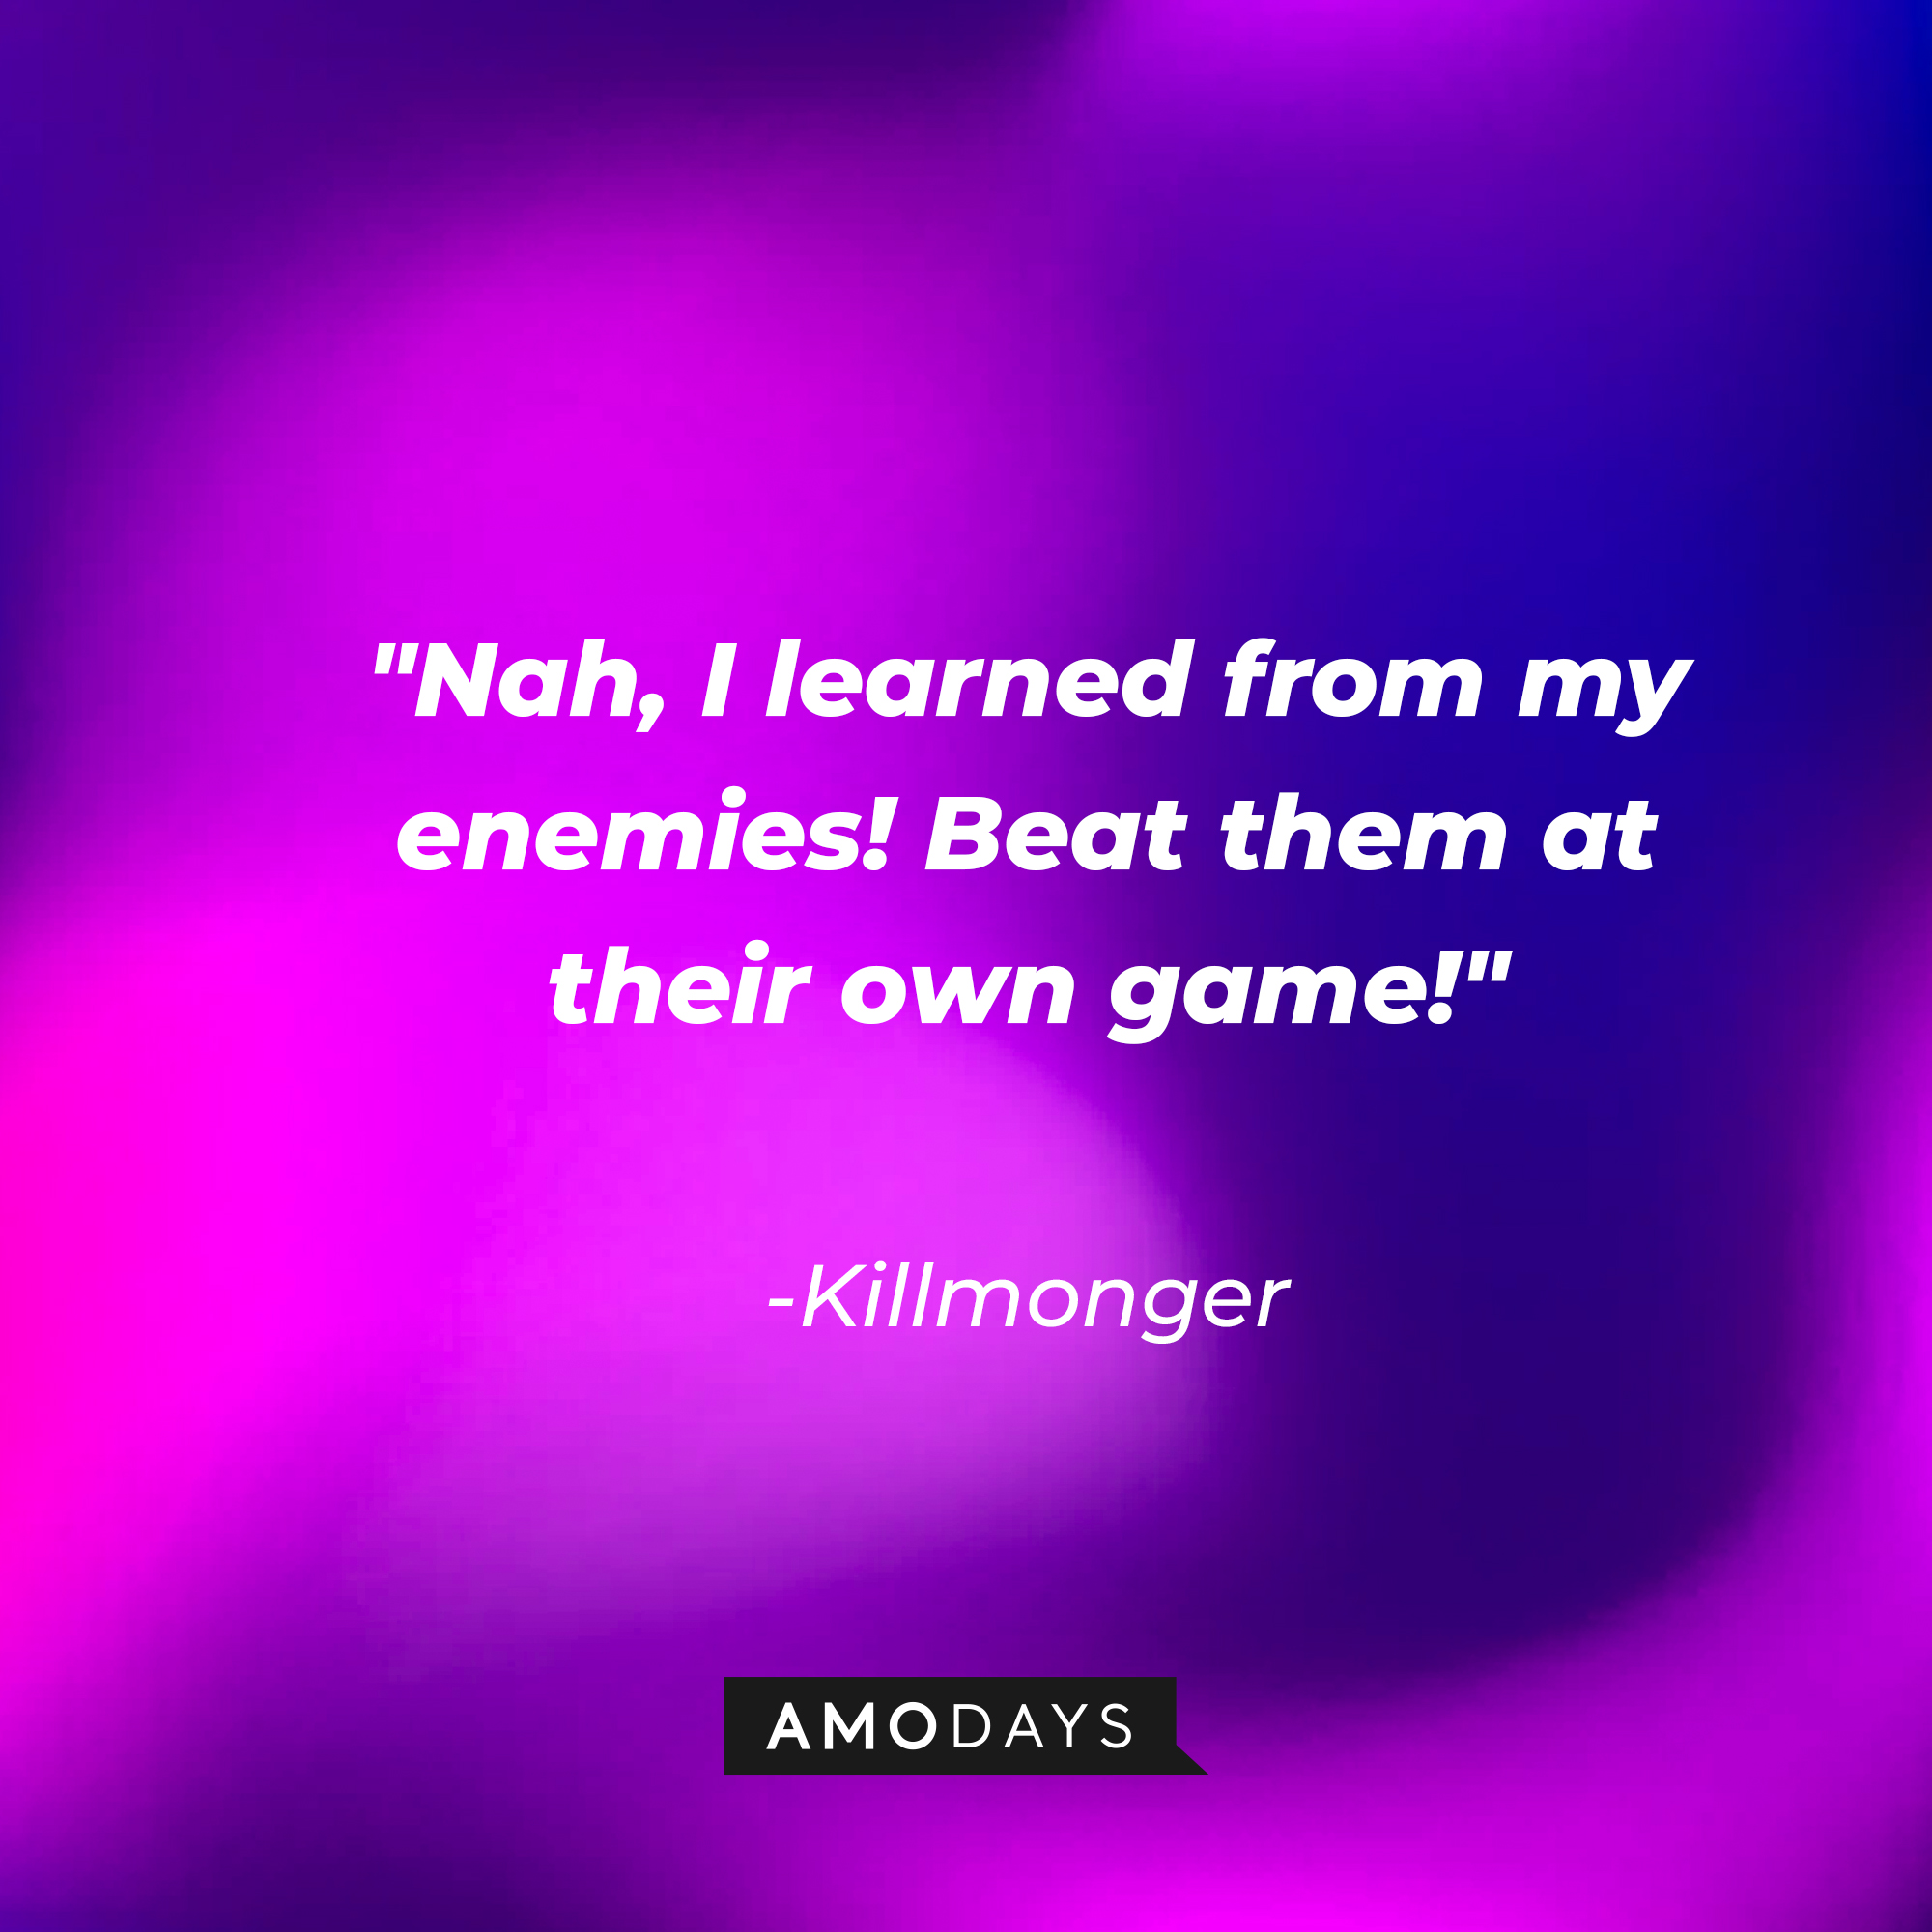 Killmonger's quote: "Nah, I learned from my enemies! Beat them at their own game!" | Source: AmoDays